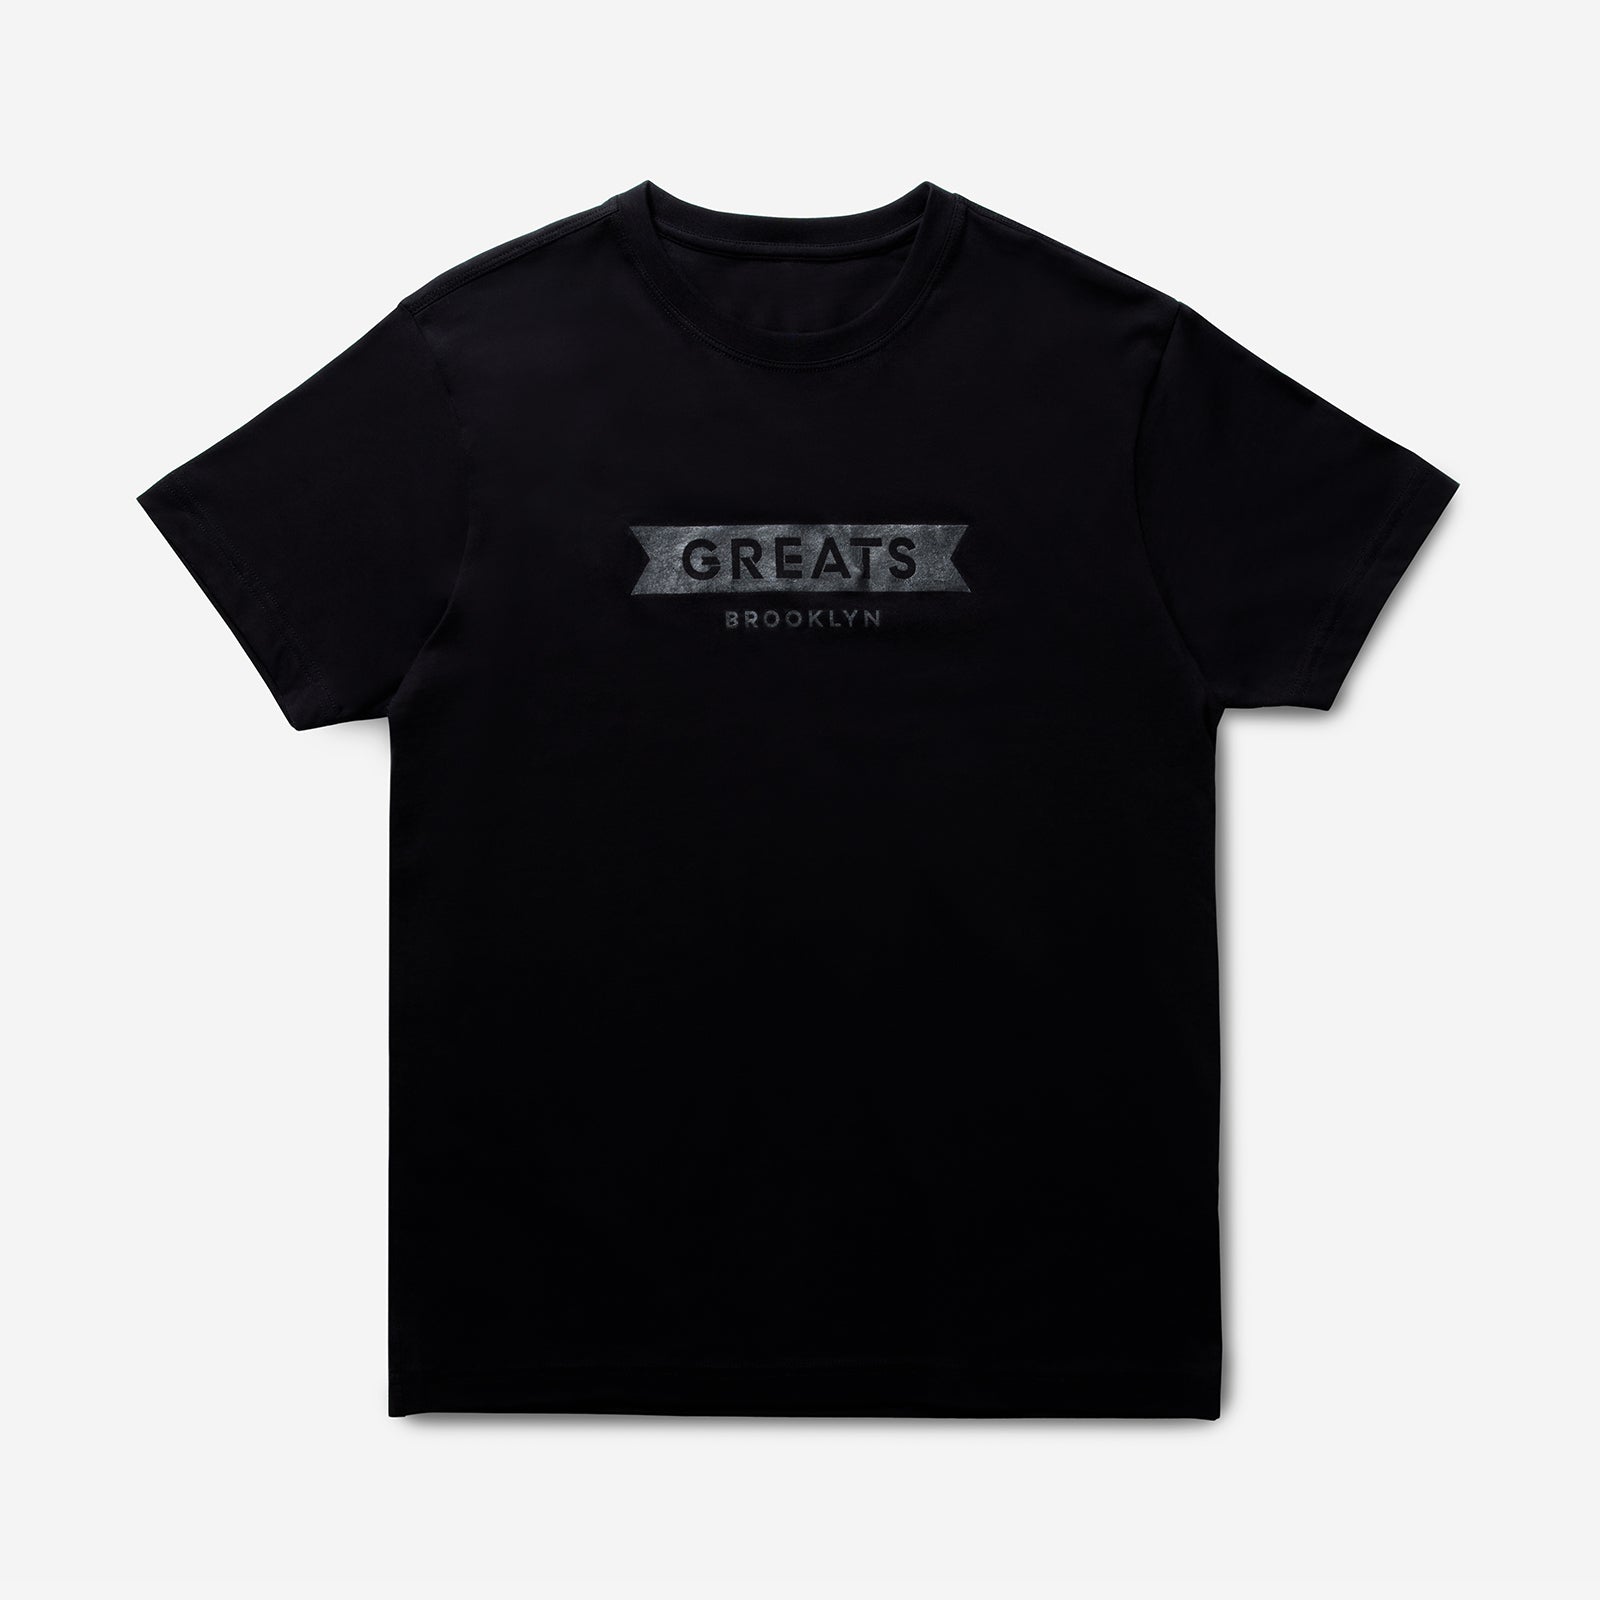 The GREATS Tee - Black Foil